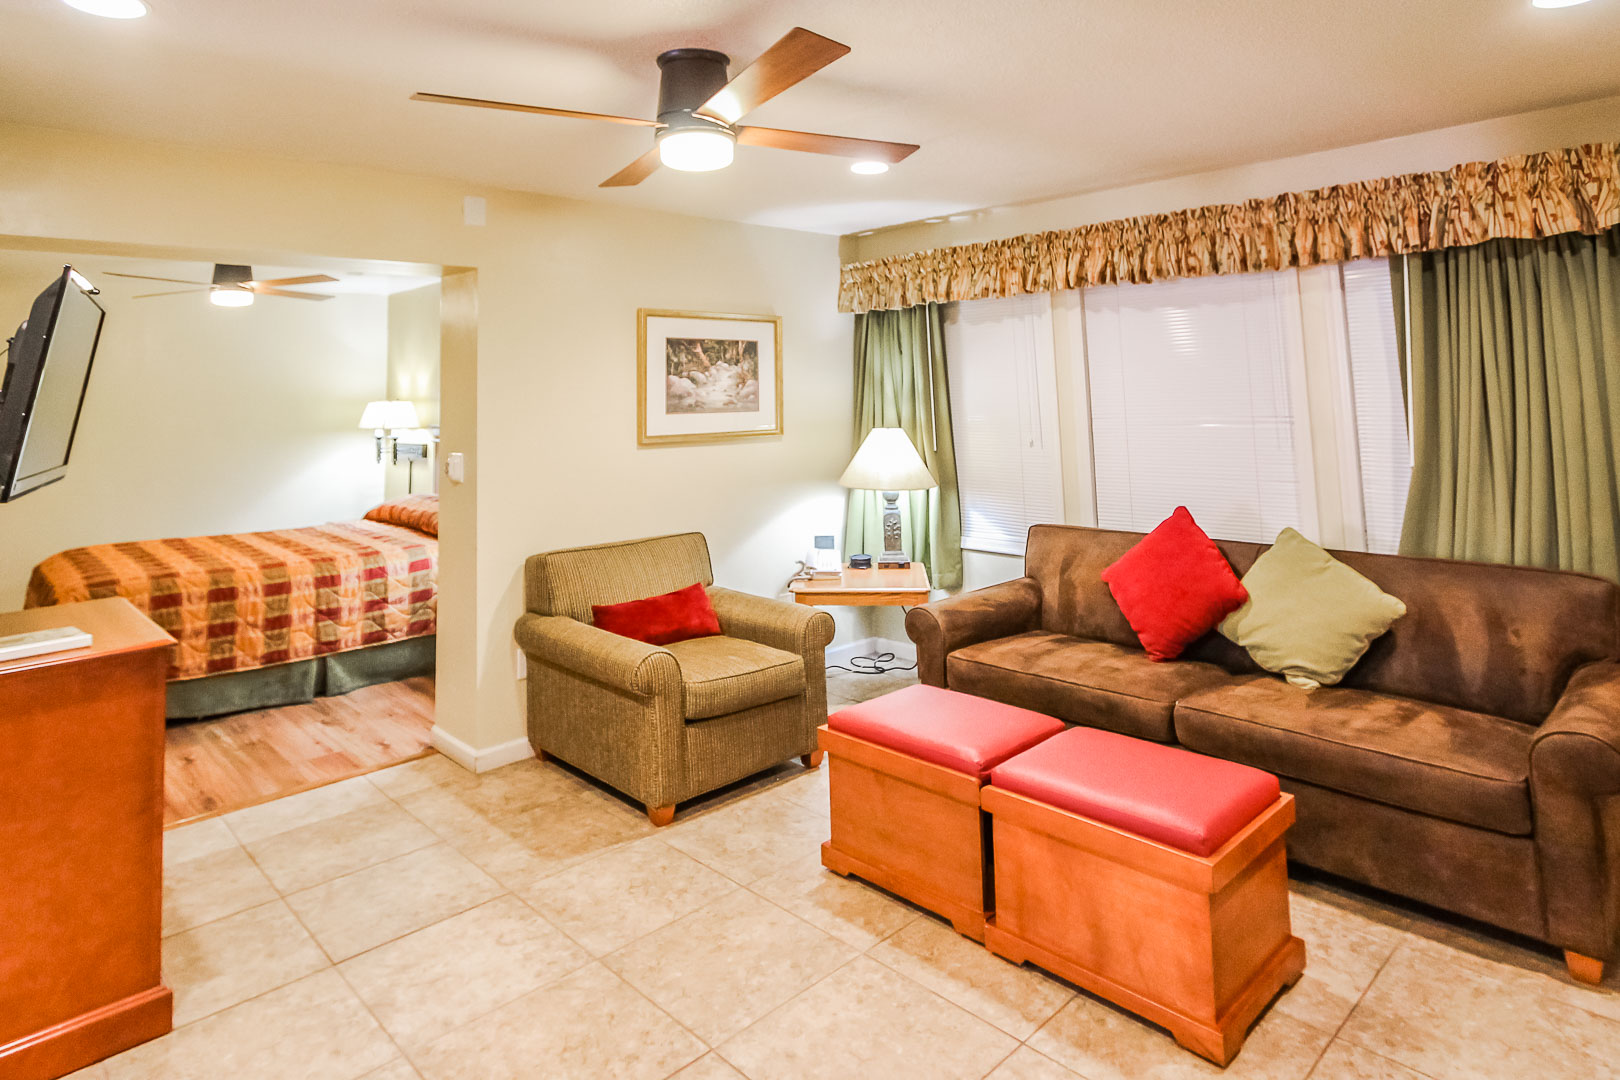 A one bedroom unit with a spacious living room at VRI's Roundhouse Resort in Pinetop, Arizona.